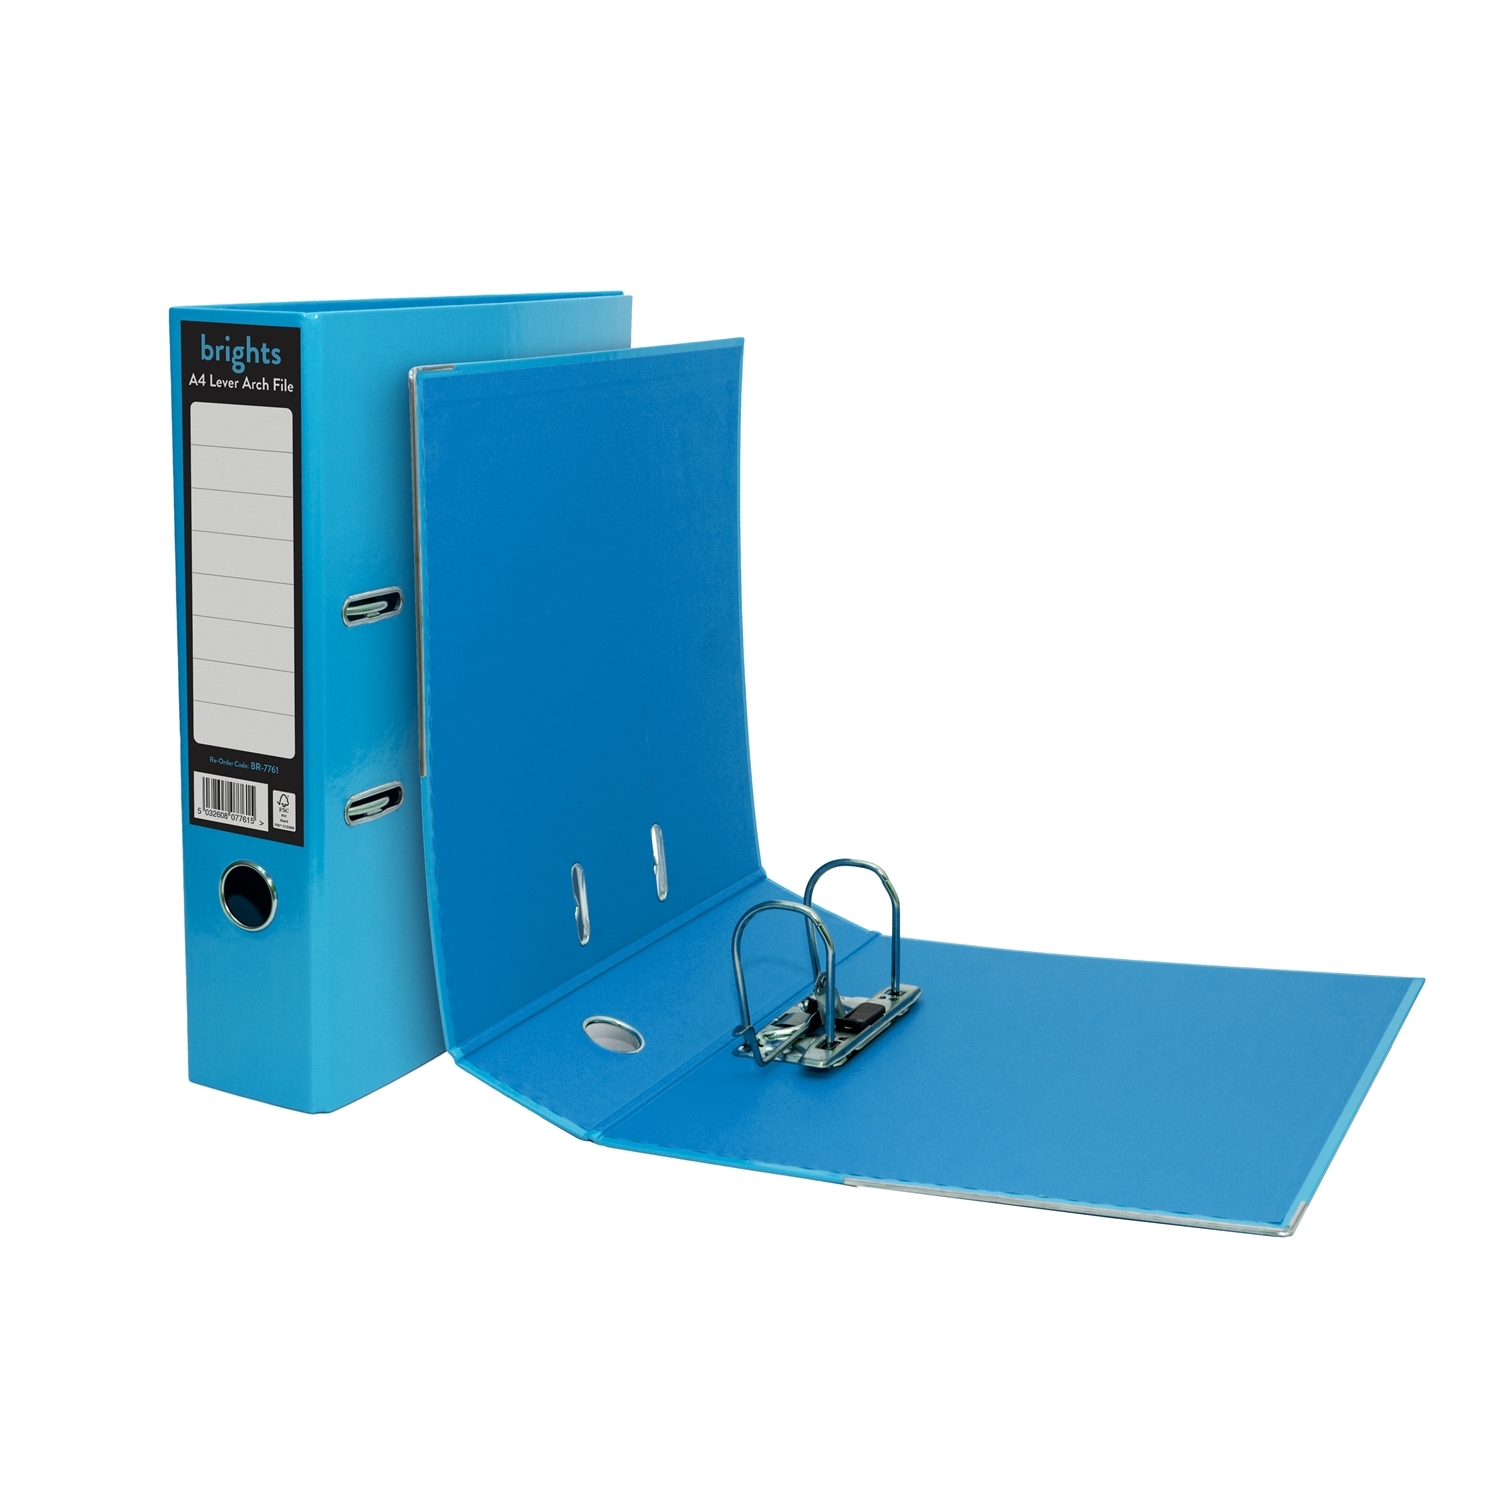 Pukka Blue Brights Lever Arch File Image